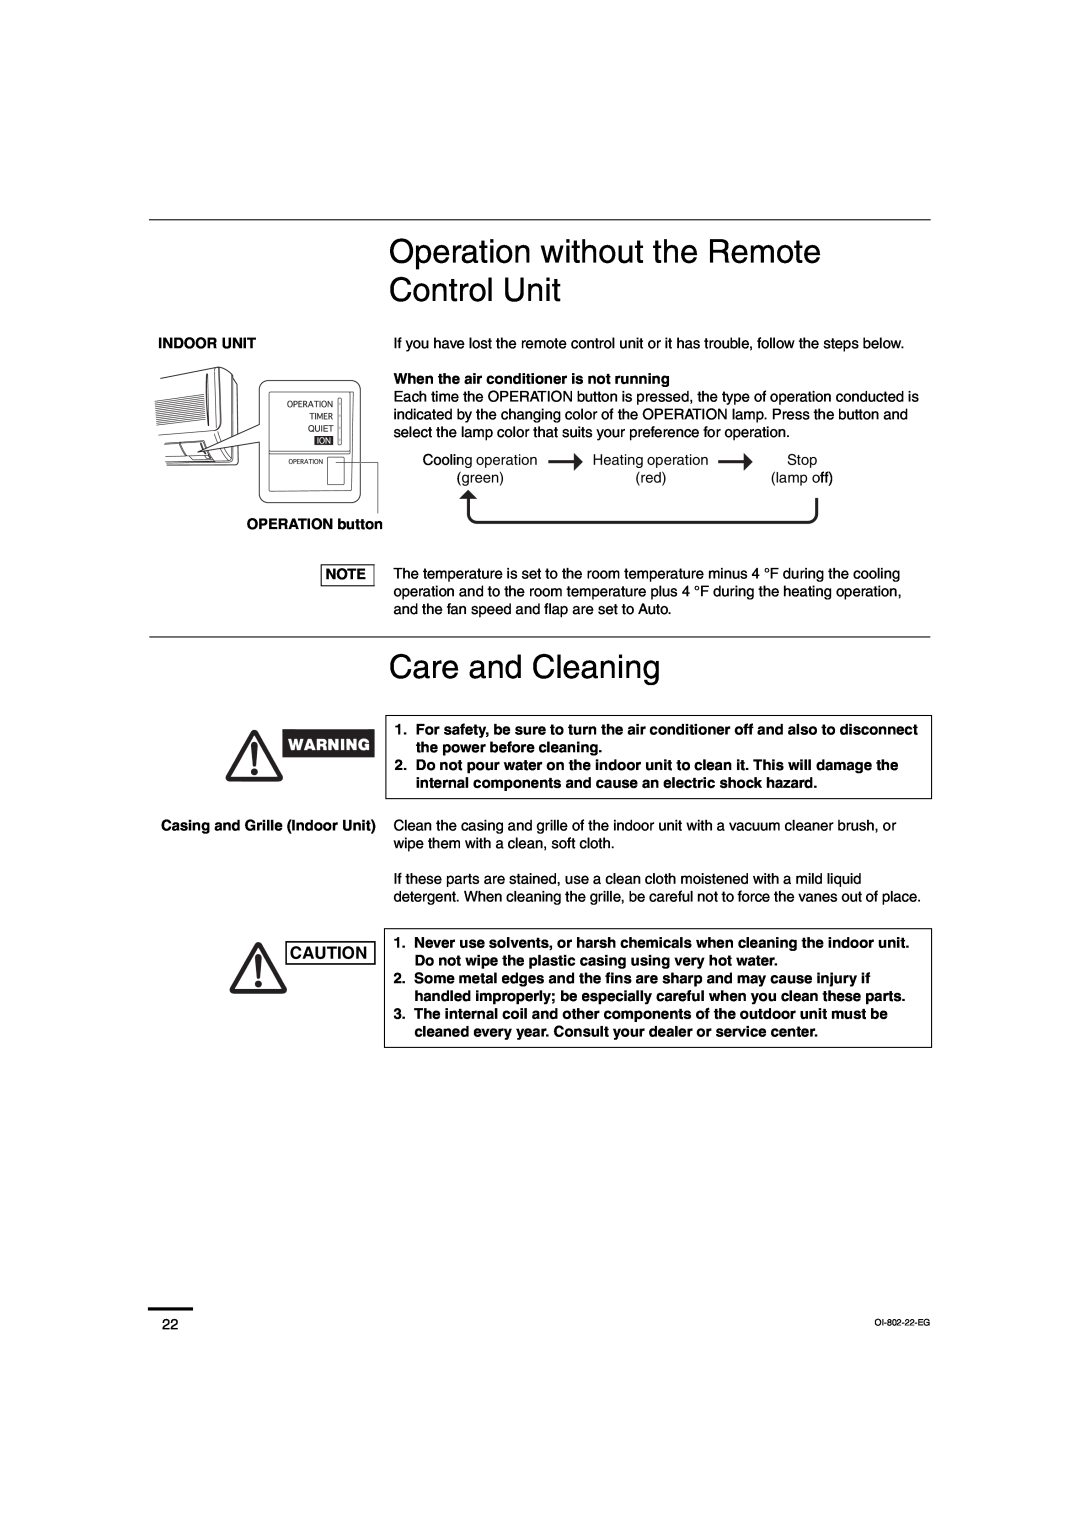 Sanyo CH0971, CH1271 service manual Operation without the Remote Control Unit, Care and Cleaning 